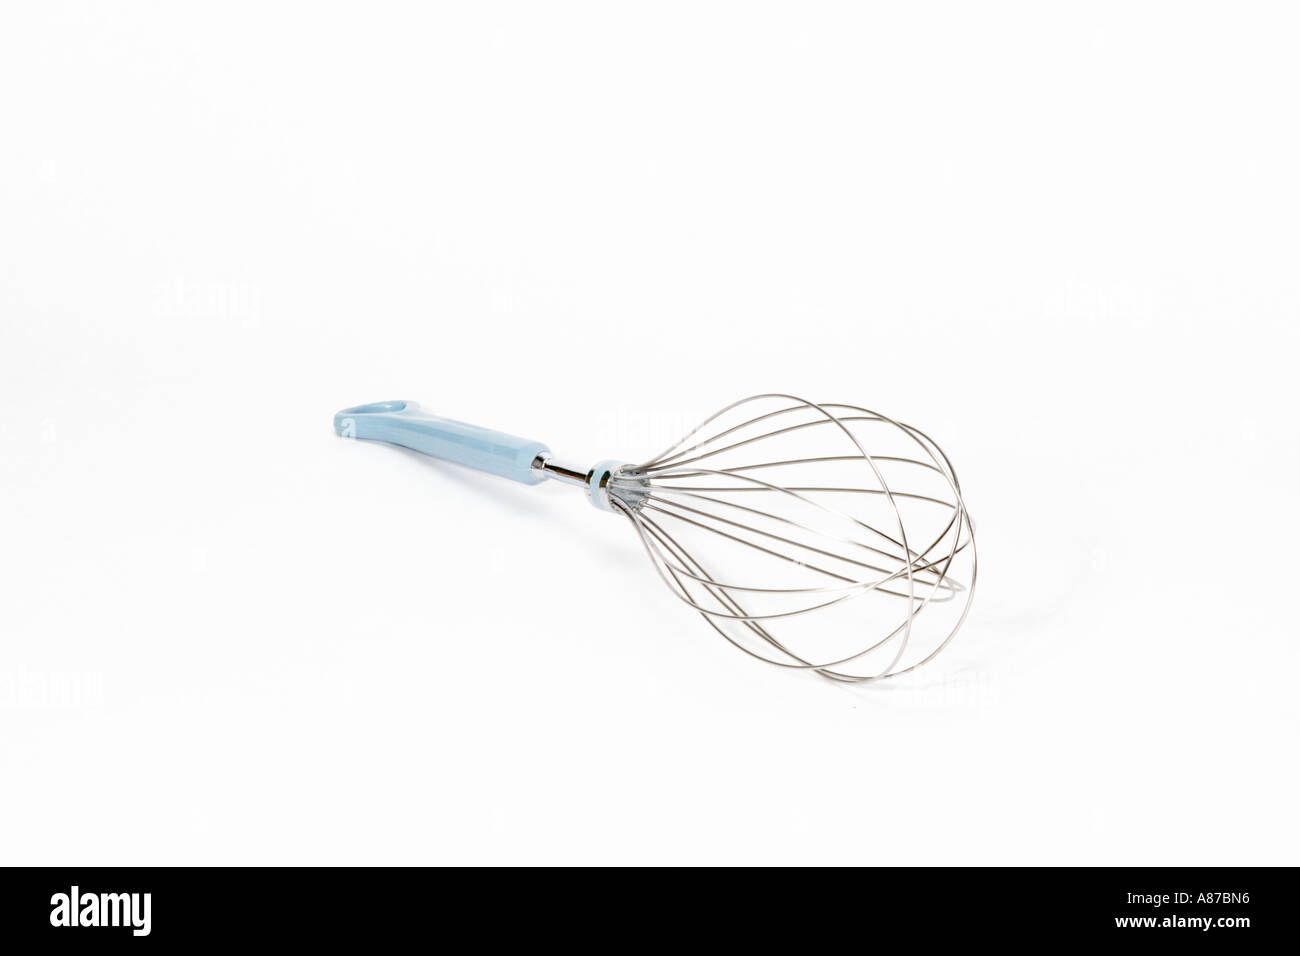 Close up of a stainelss steel whisk cooking utensil with a blue handle Stock Photo